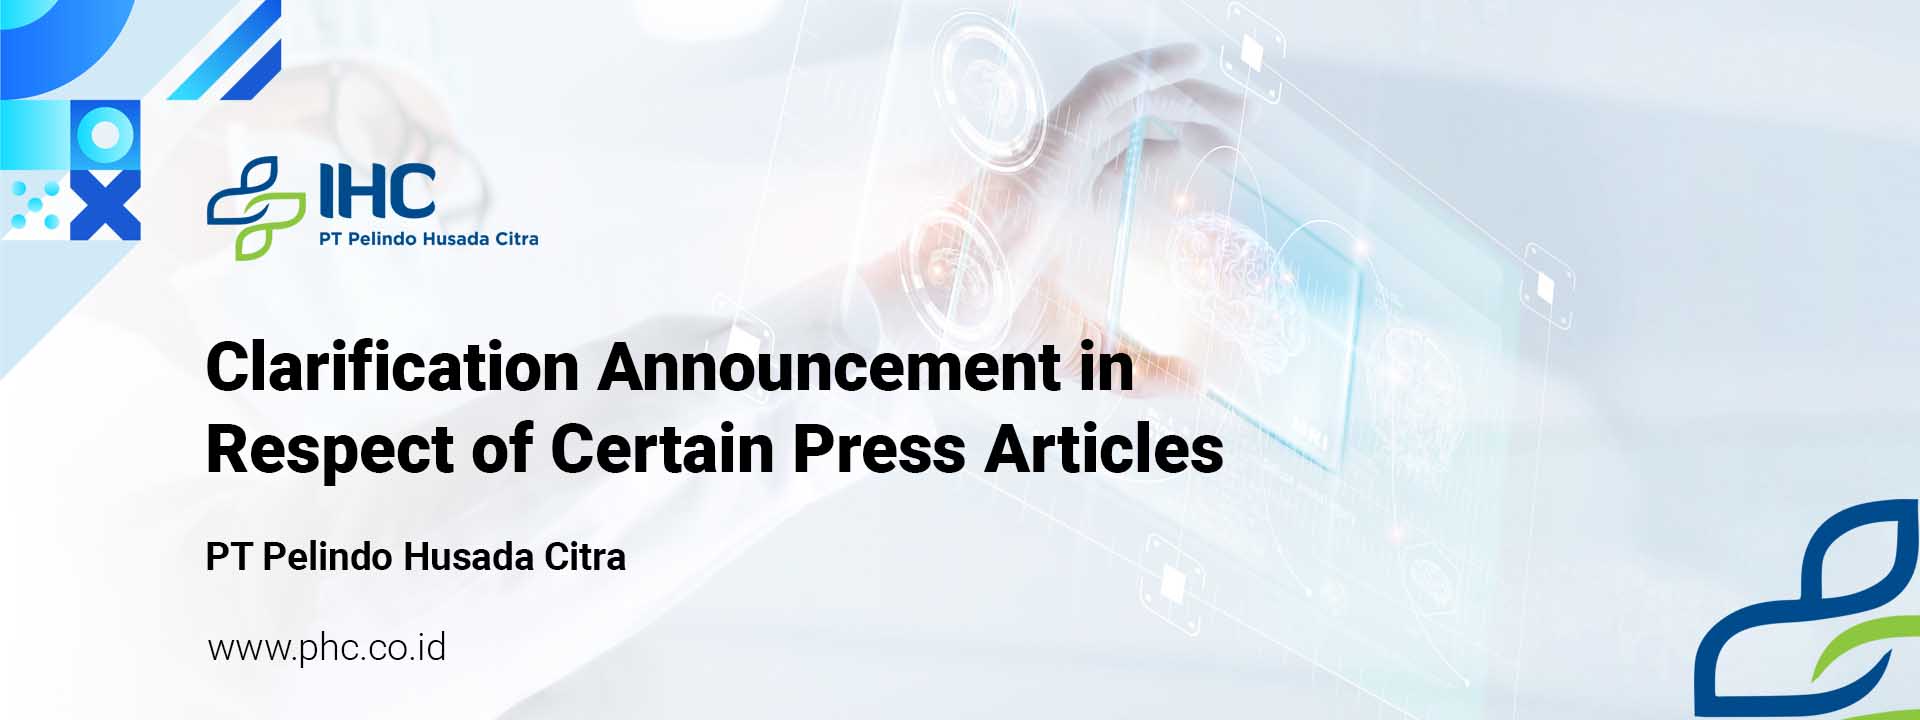 Clarification Announcement in Respect of Certain Press Articles